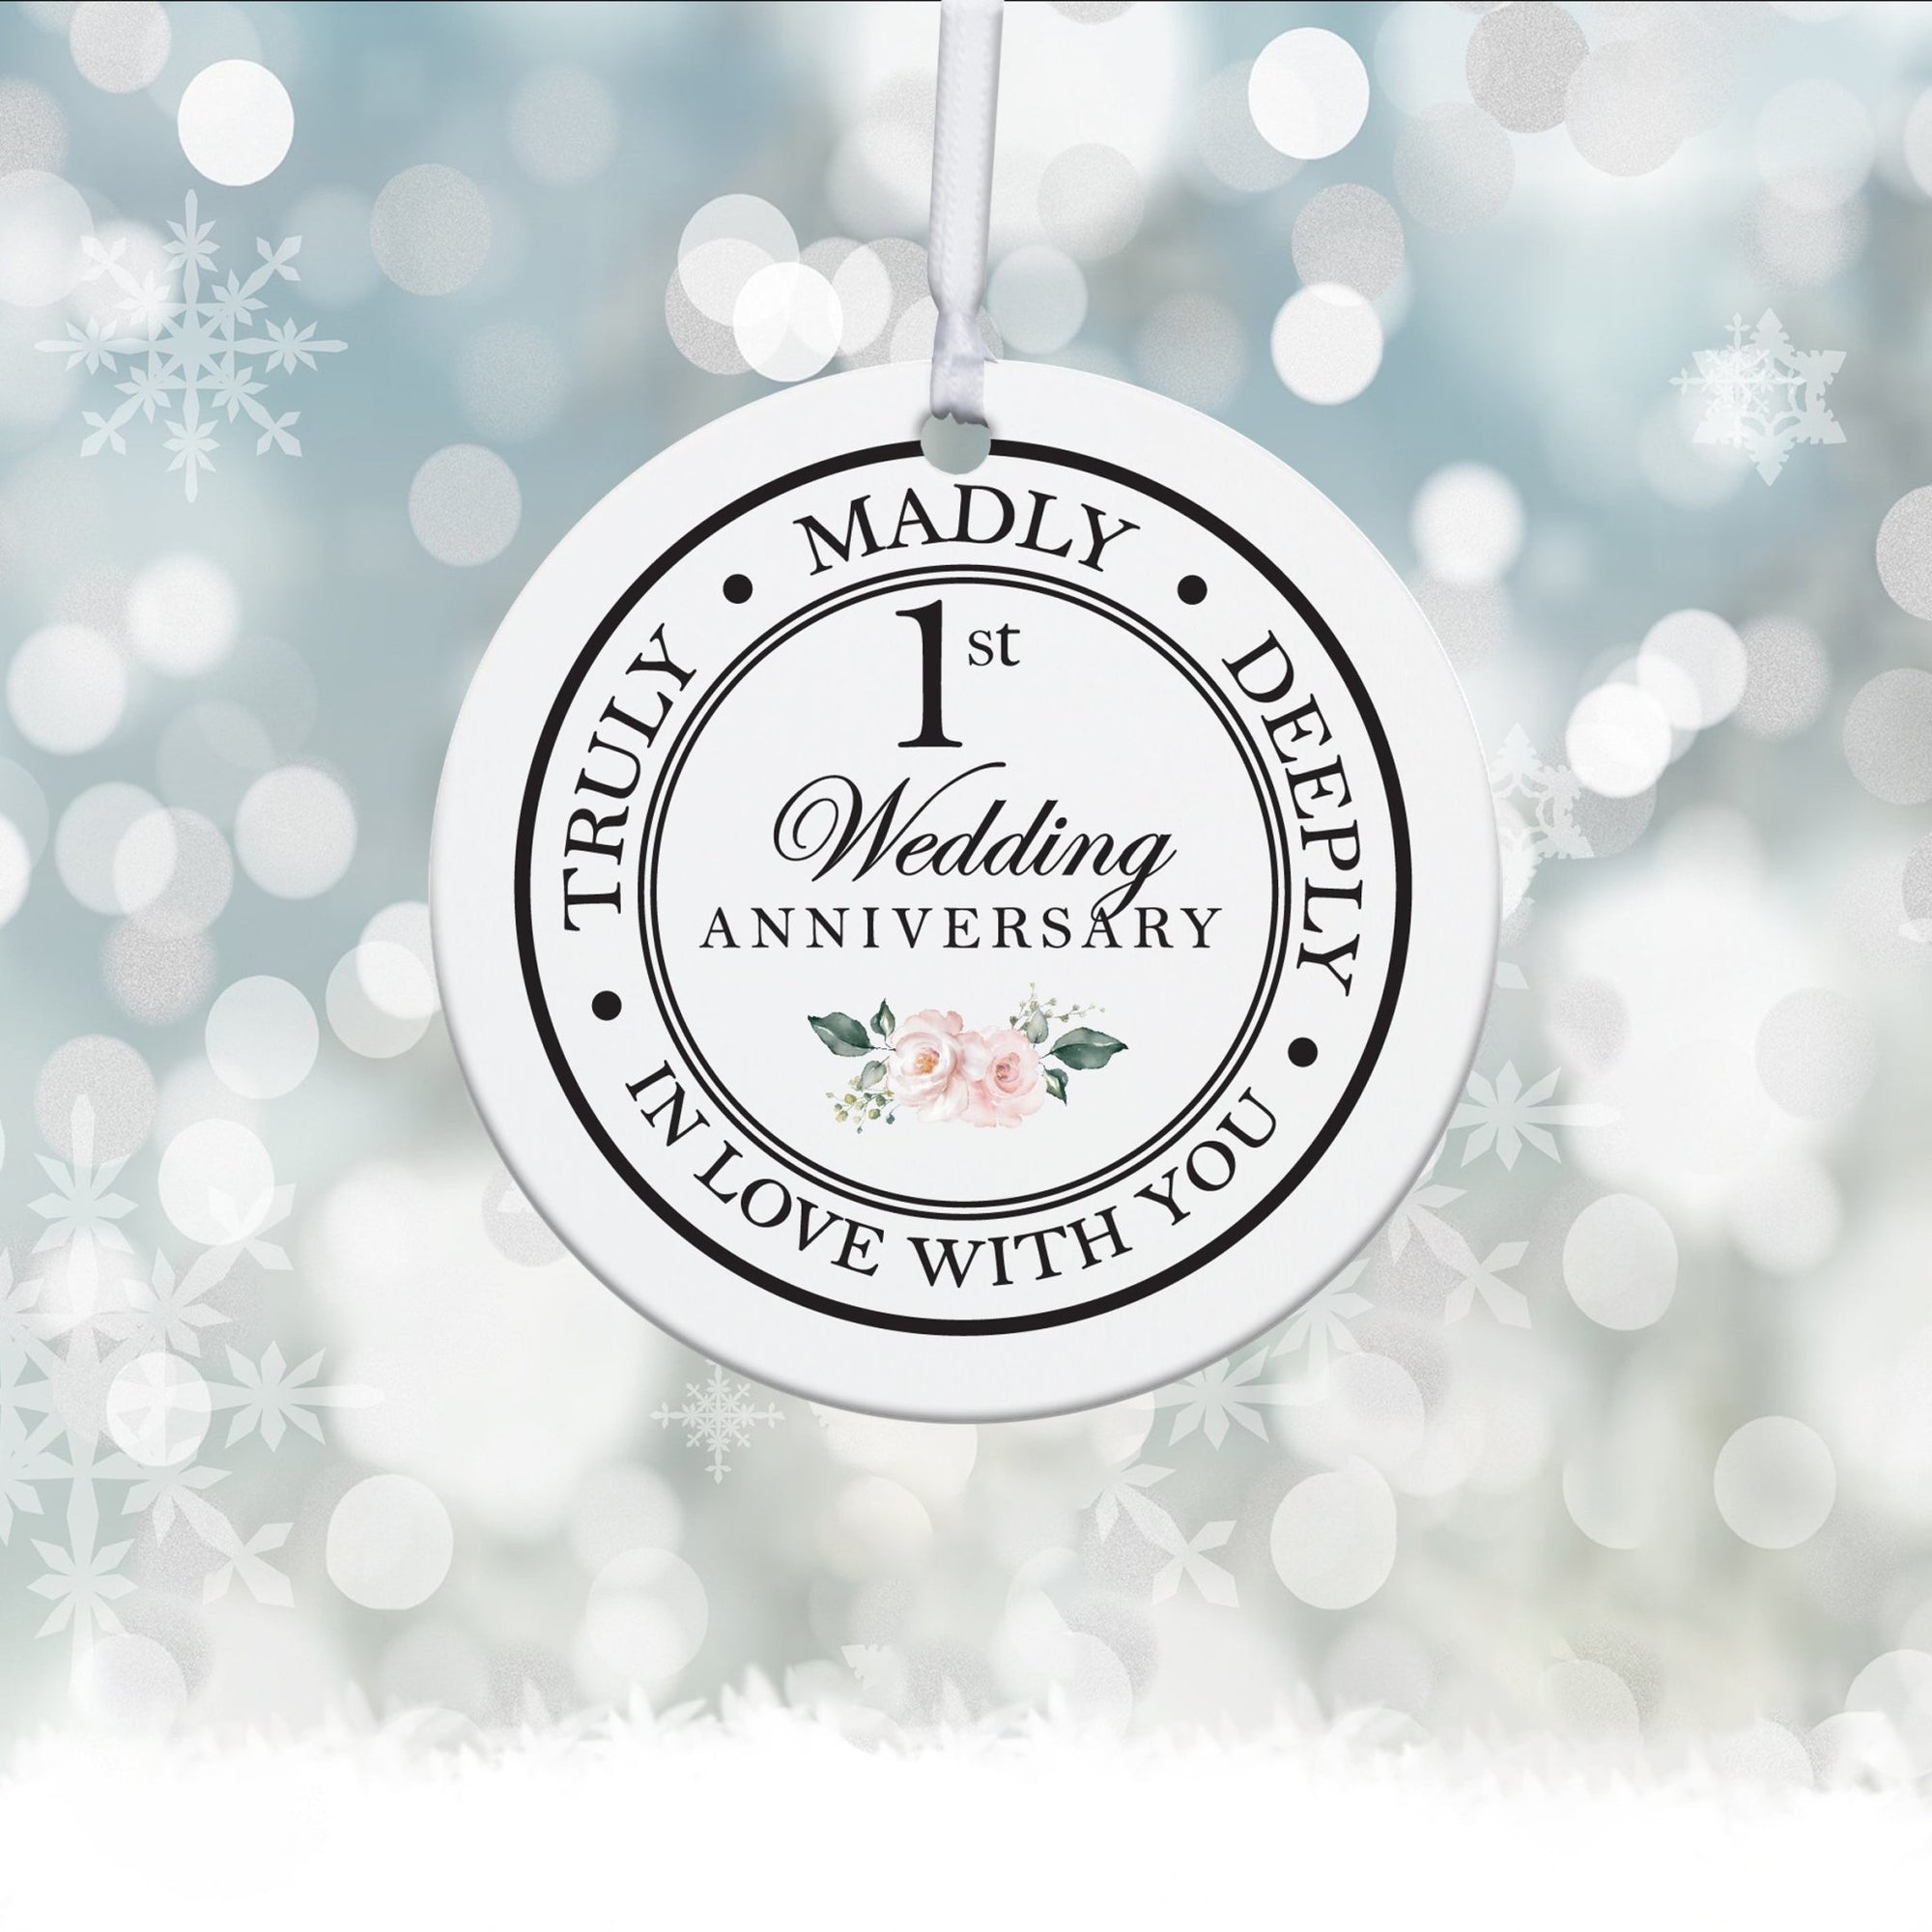 1st Wedding Anniversary White Ornament With Inspirational Message Gift Ideas - Truly, Madly, Deeply In Love With You - LifeSong Milestones